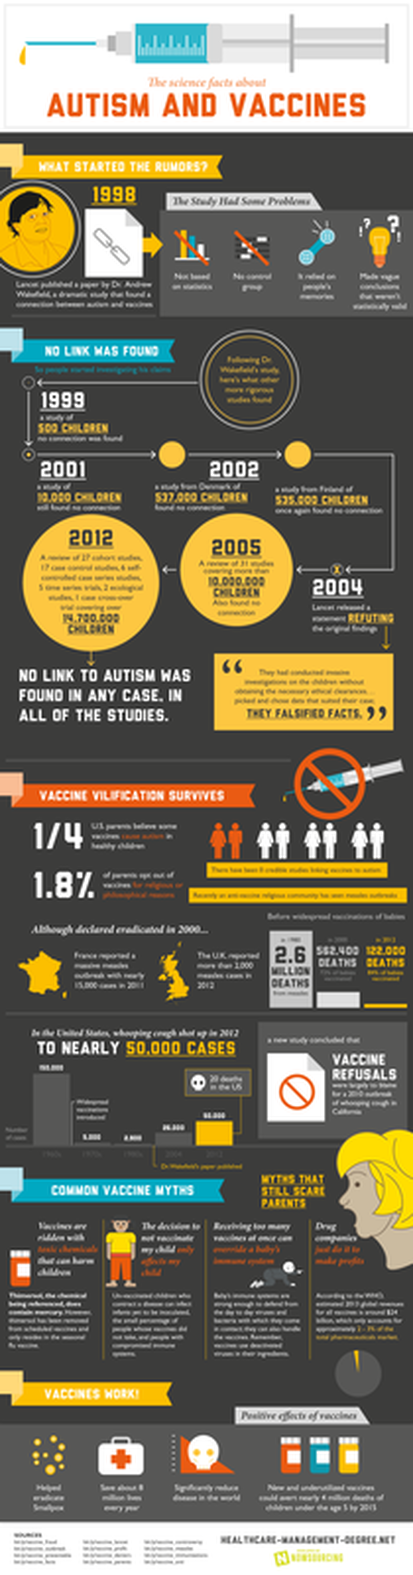 Autism and Vaccines Infographic